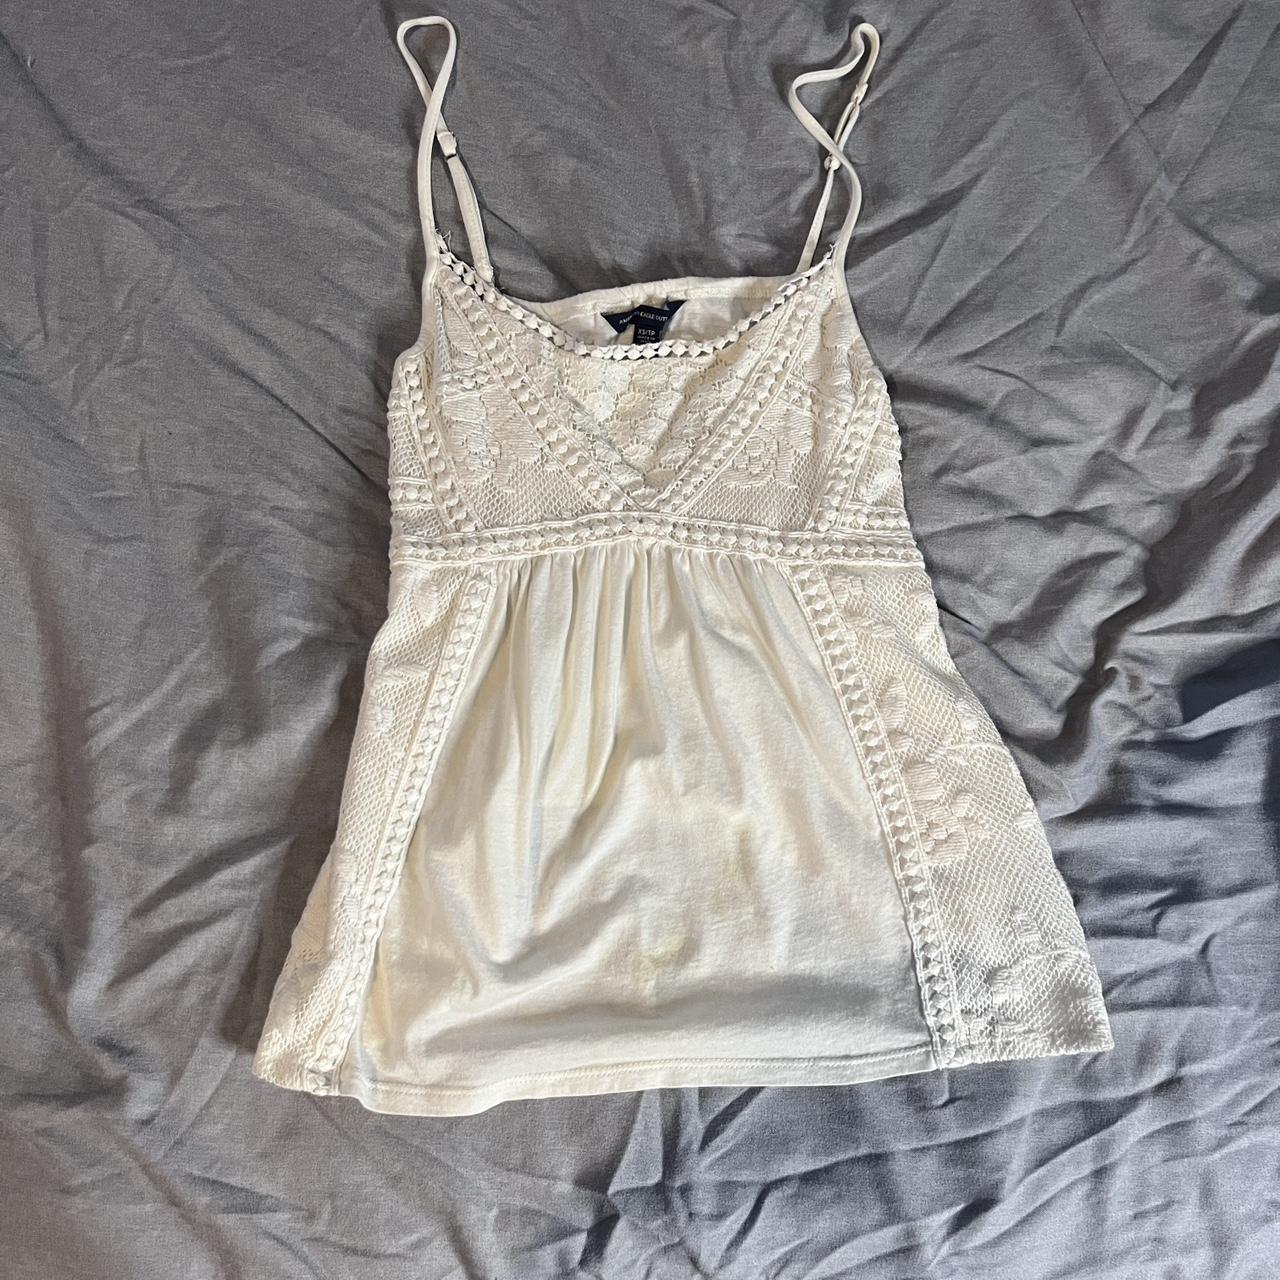 Super cute cami from ae! #vintage #ae #cute #cottage - Depop